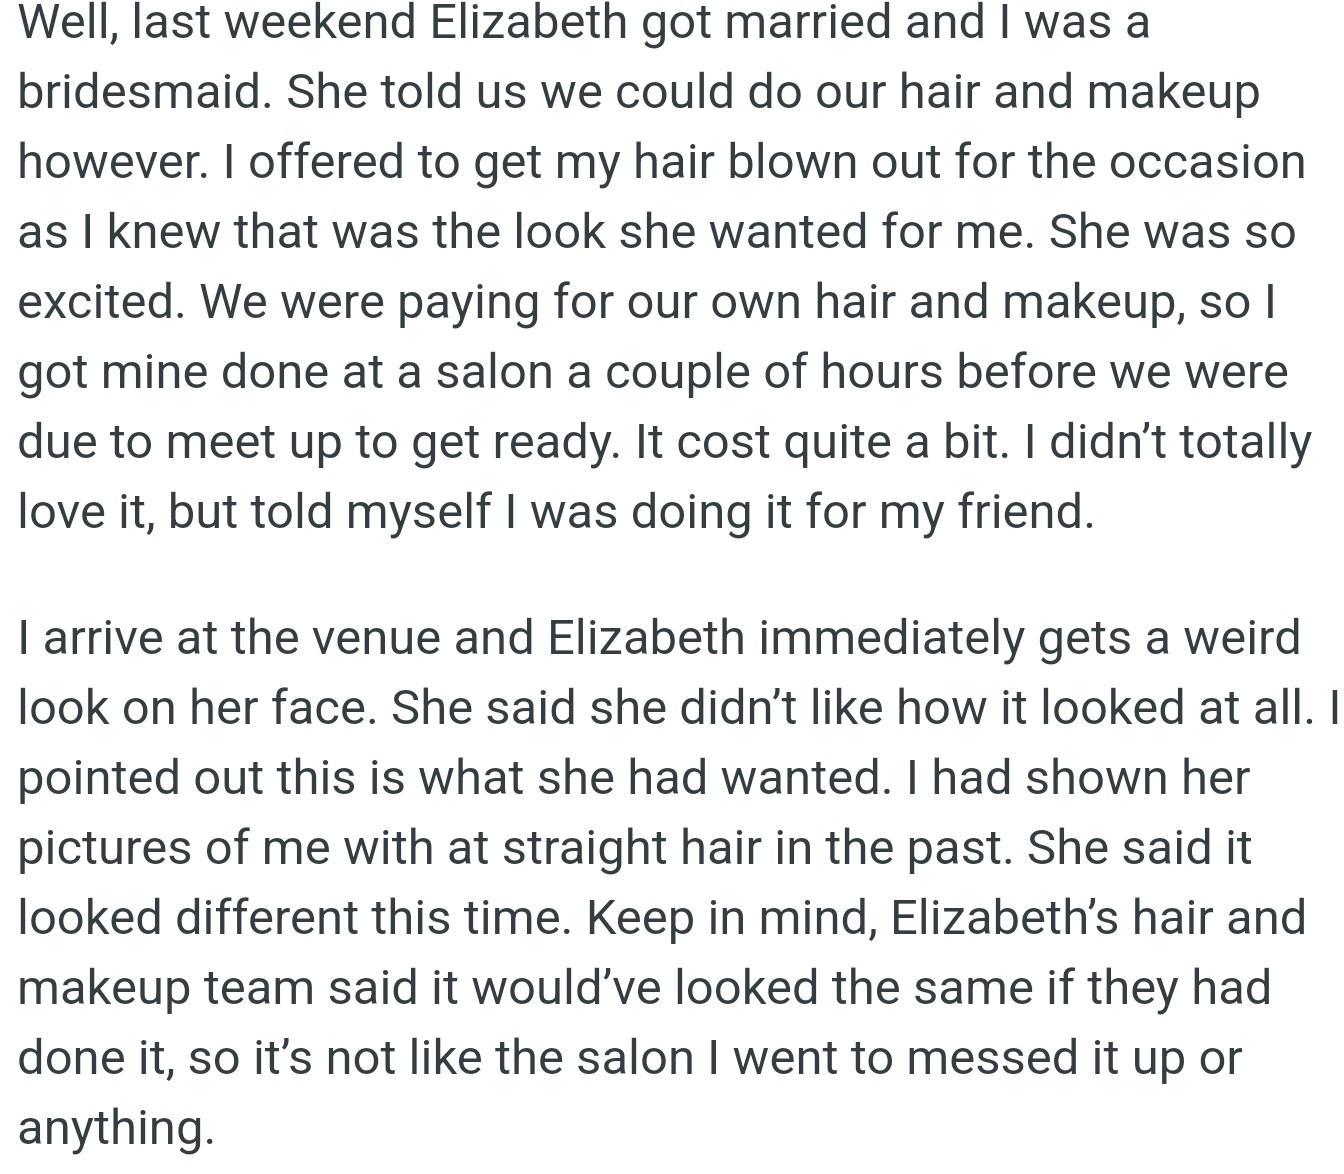 OP followed Elizabeth's request to style her hair for her wedding but Elizabeth did not like the result despite it being what she had initially wanted.